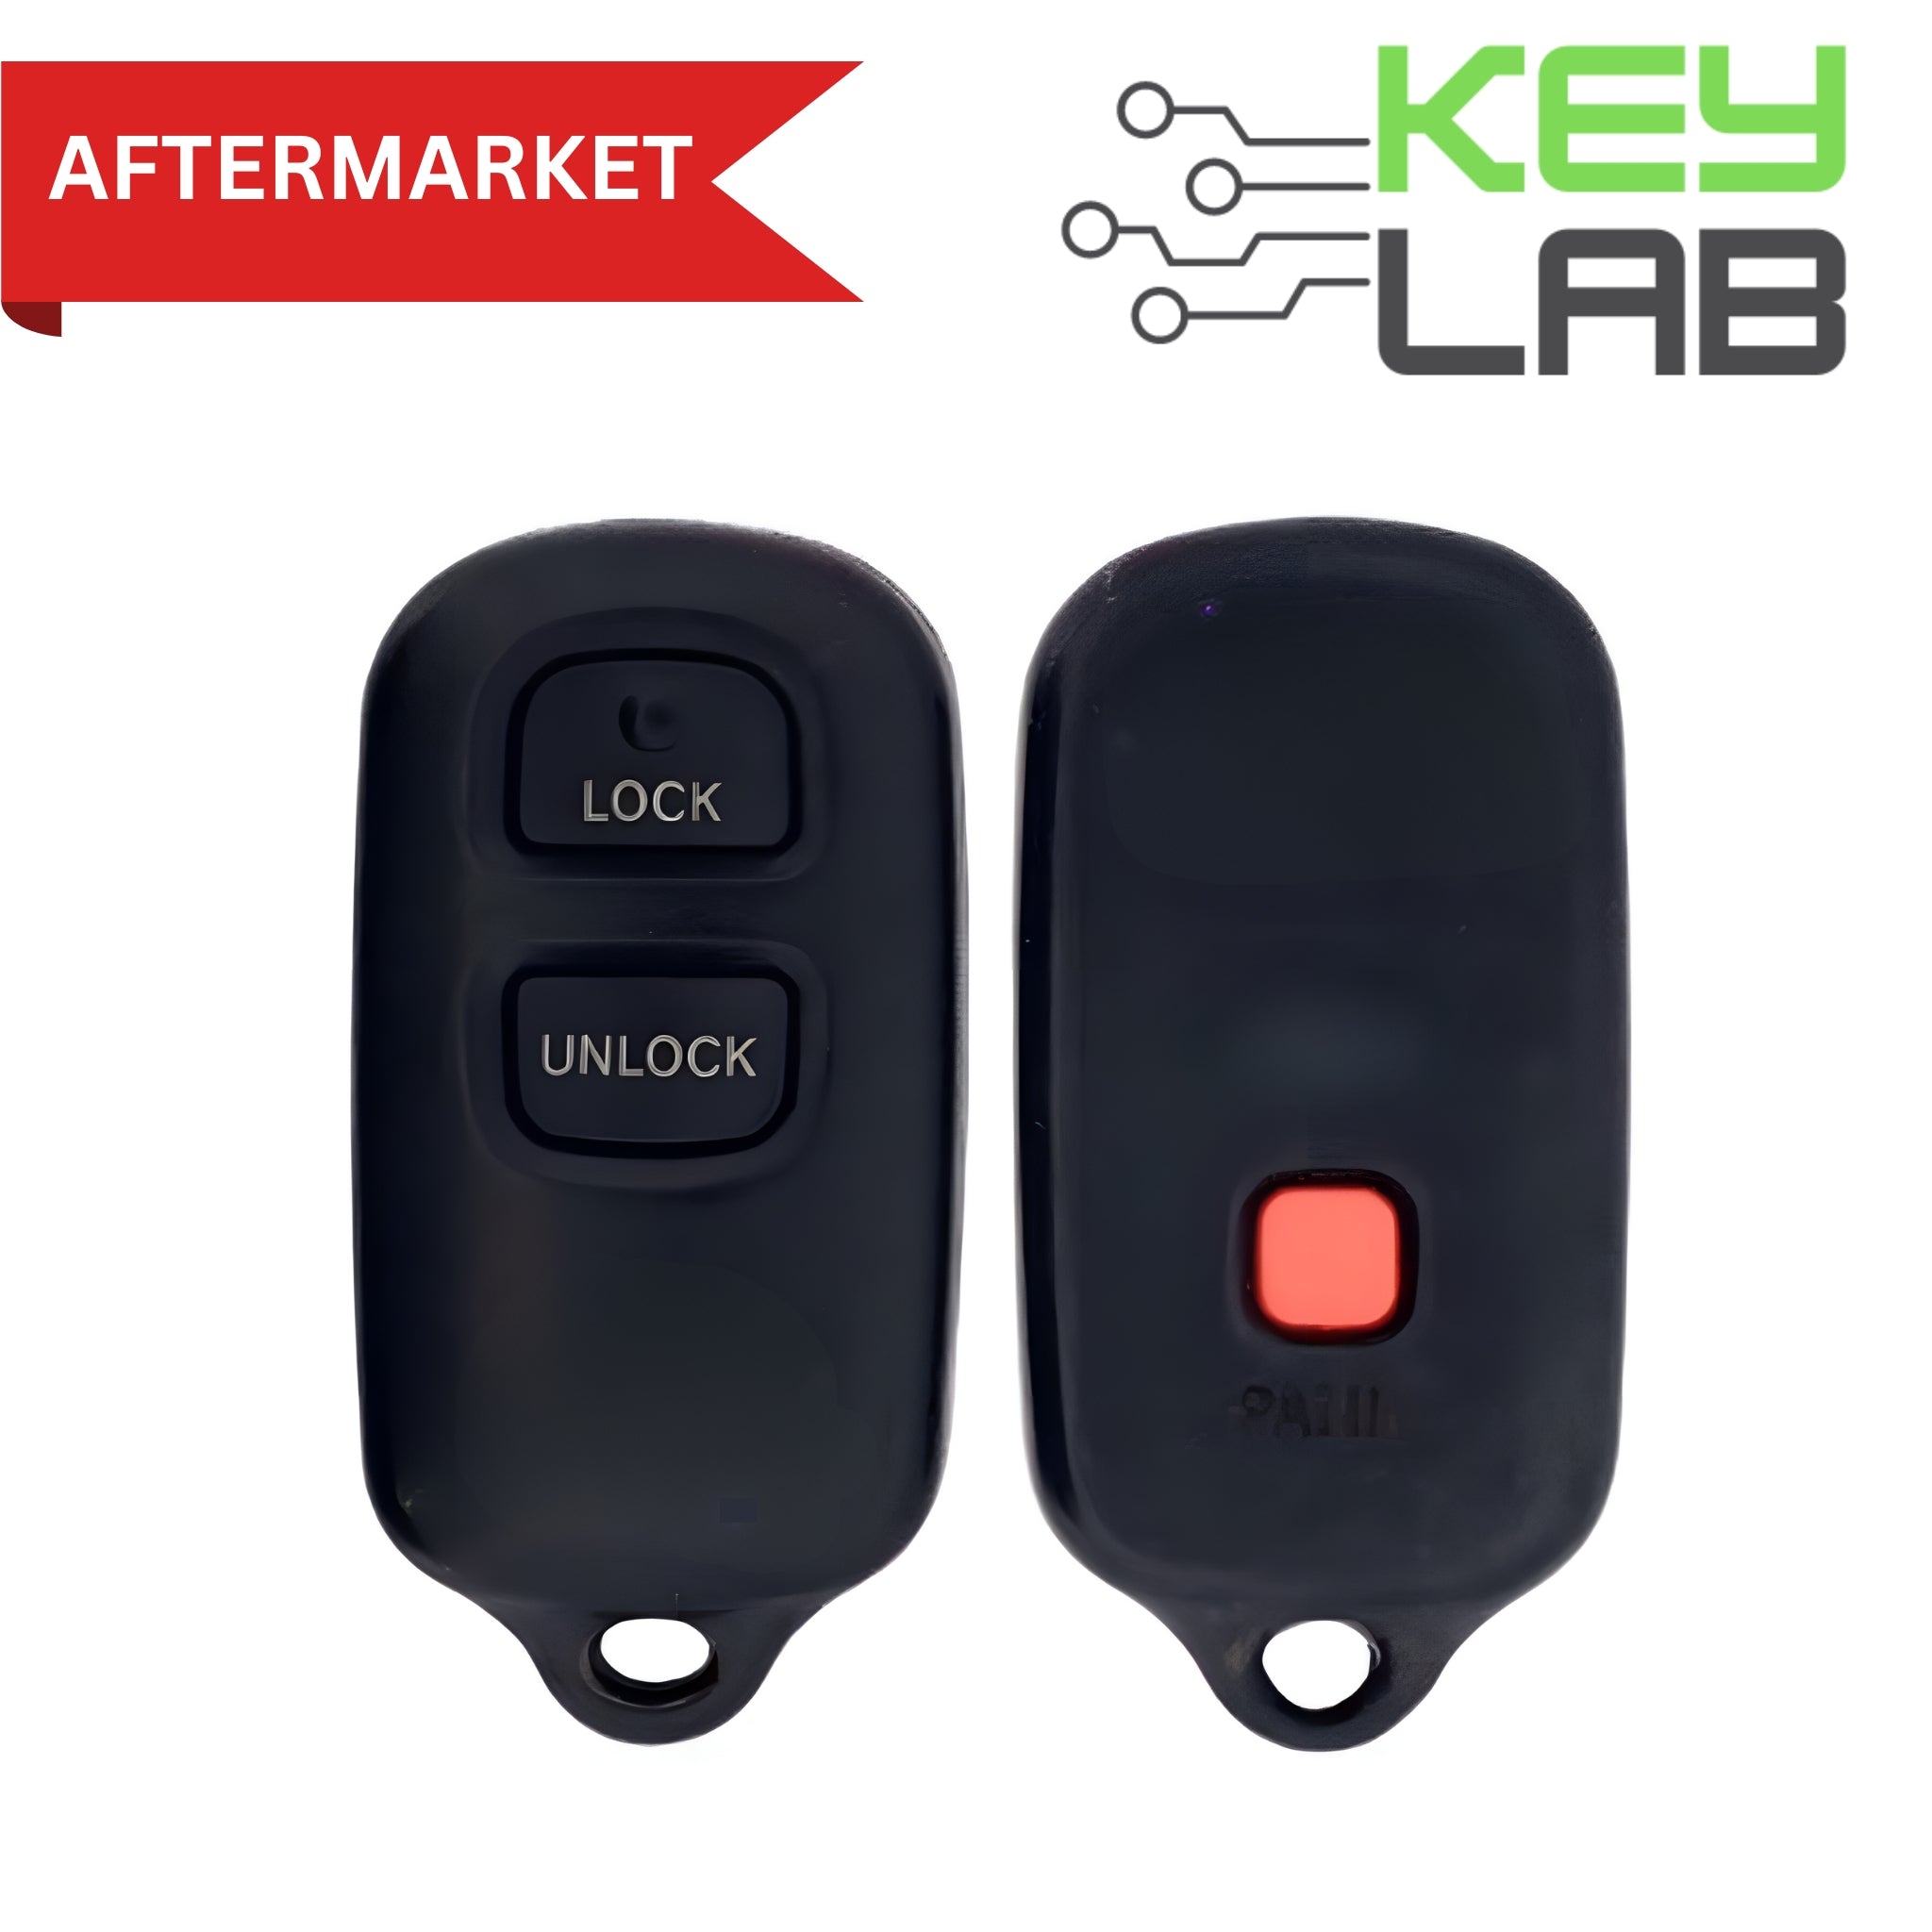 Toyota Aftermarket 1998-2008 Camry, Corolla Keyless Entry Remote 3B FCCID: GQ43VT14T PN# 89742-06010